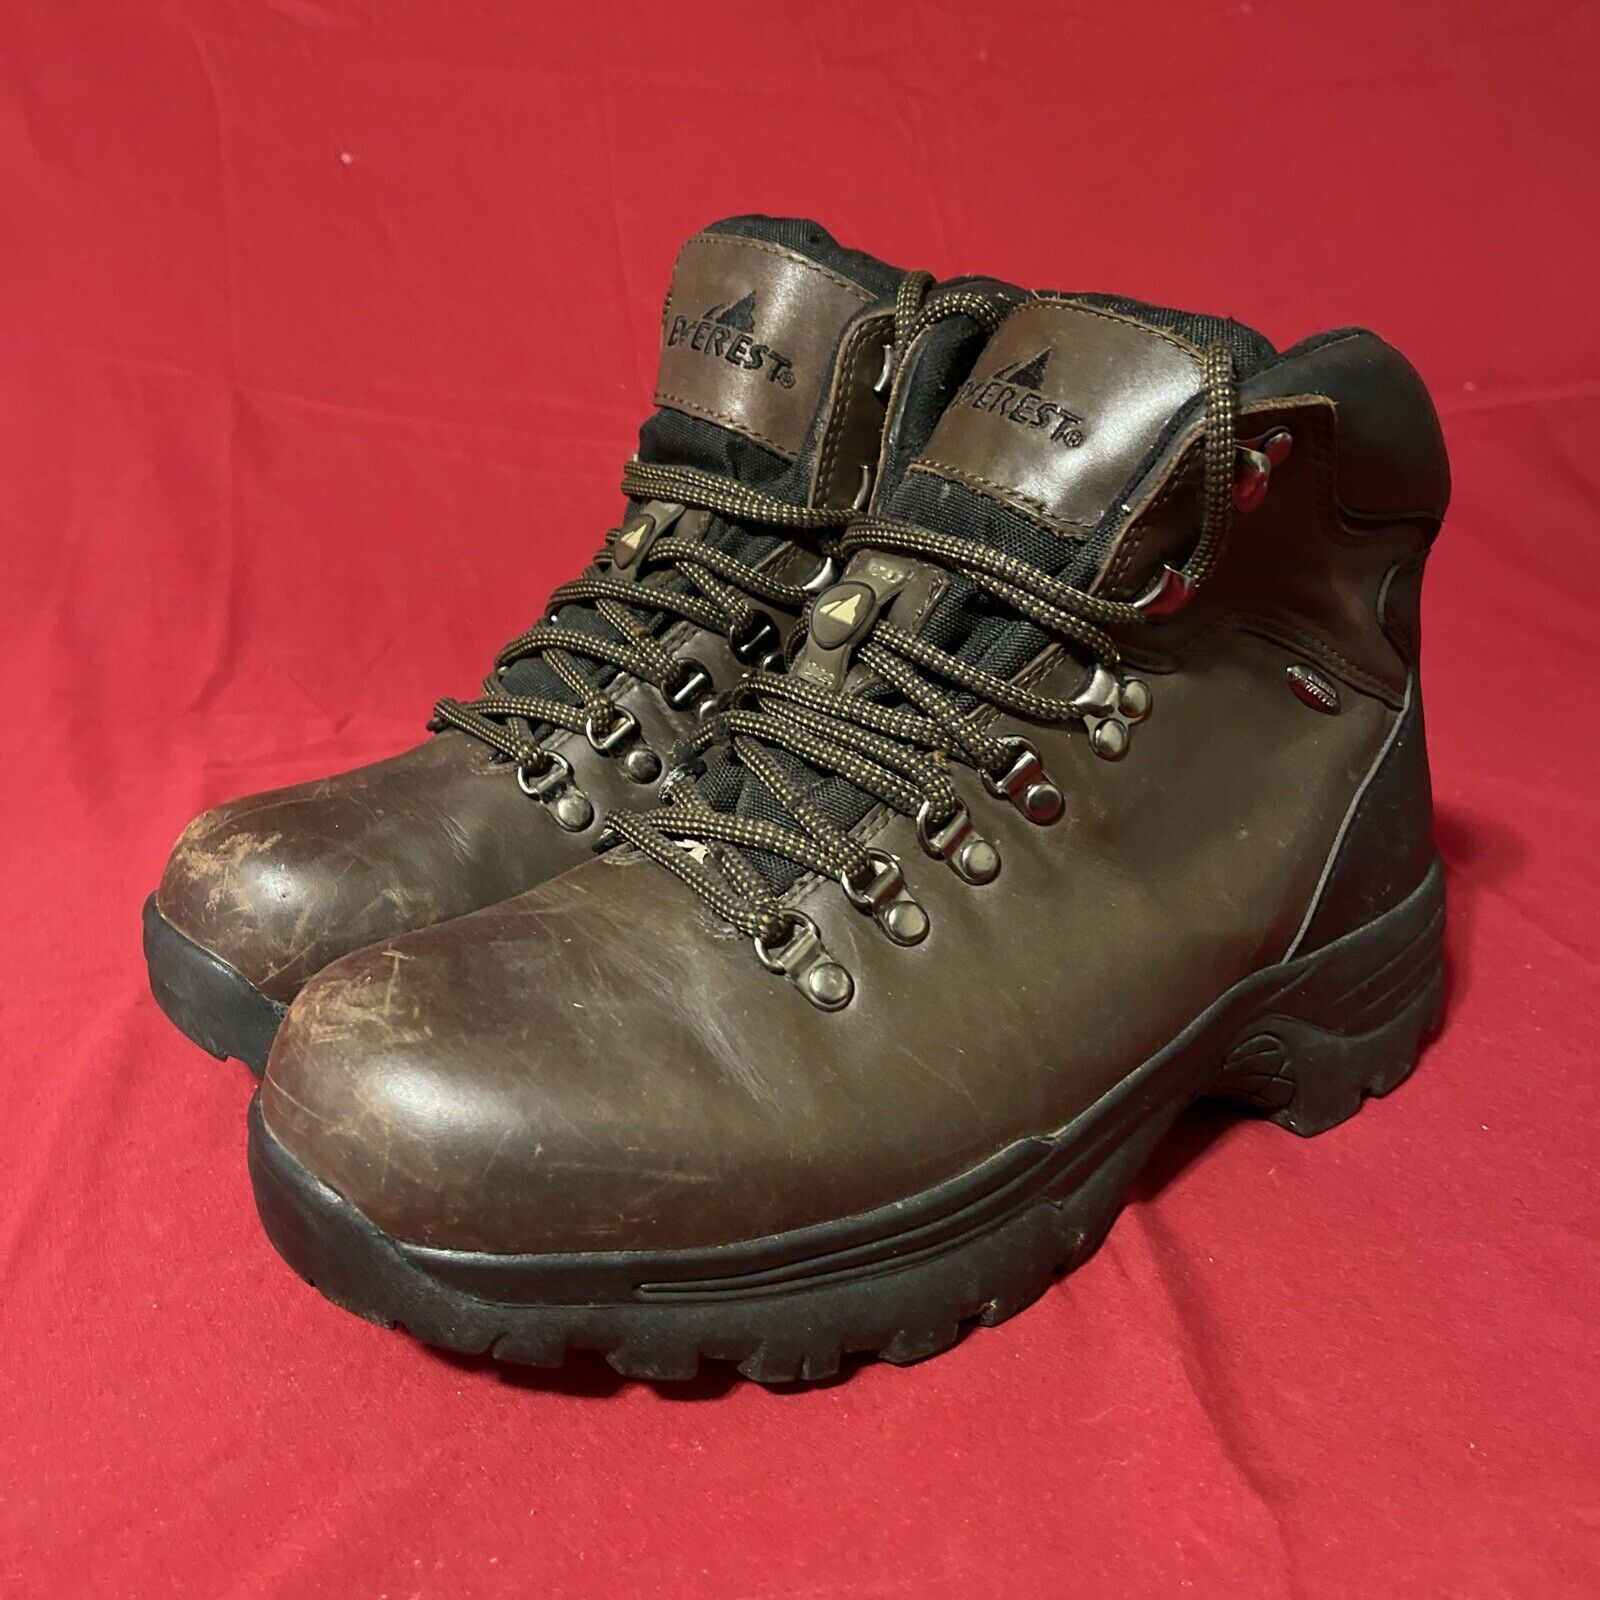 Everest Brown Leather Waterproof Work Hiking Lace Up Ankle Boots Men’s 10.5